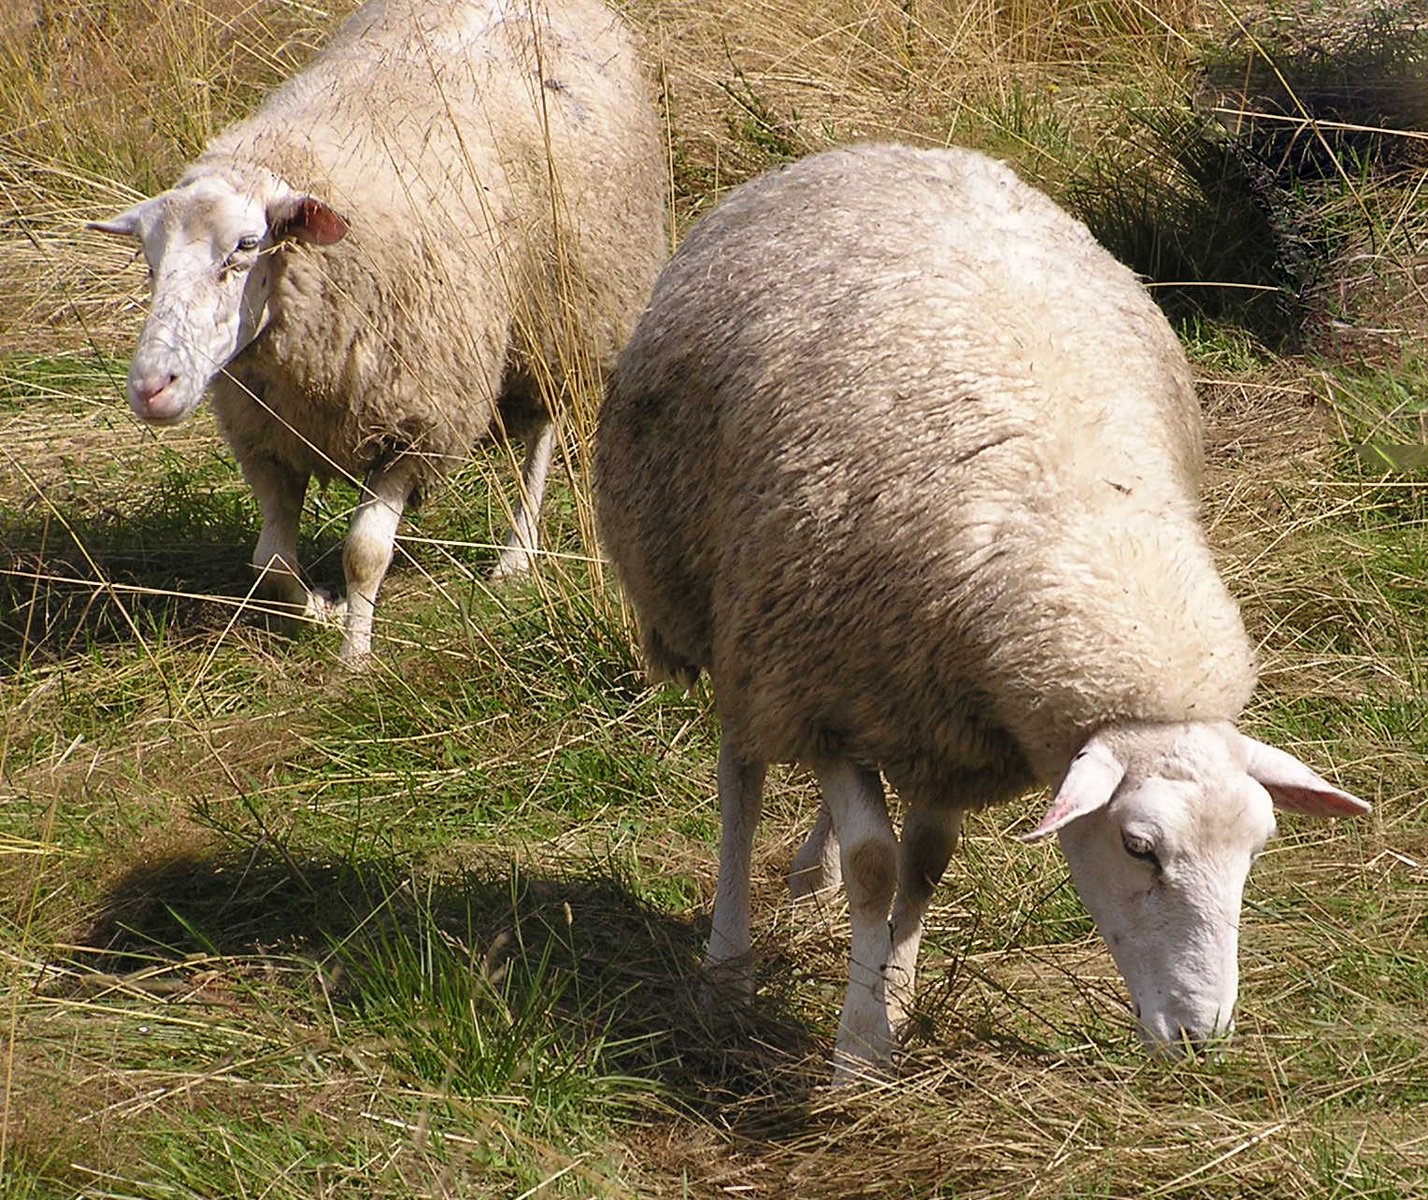 two sheep grazing together on a grassy slope